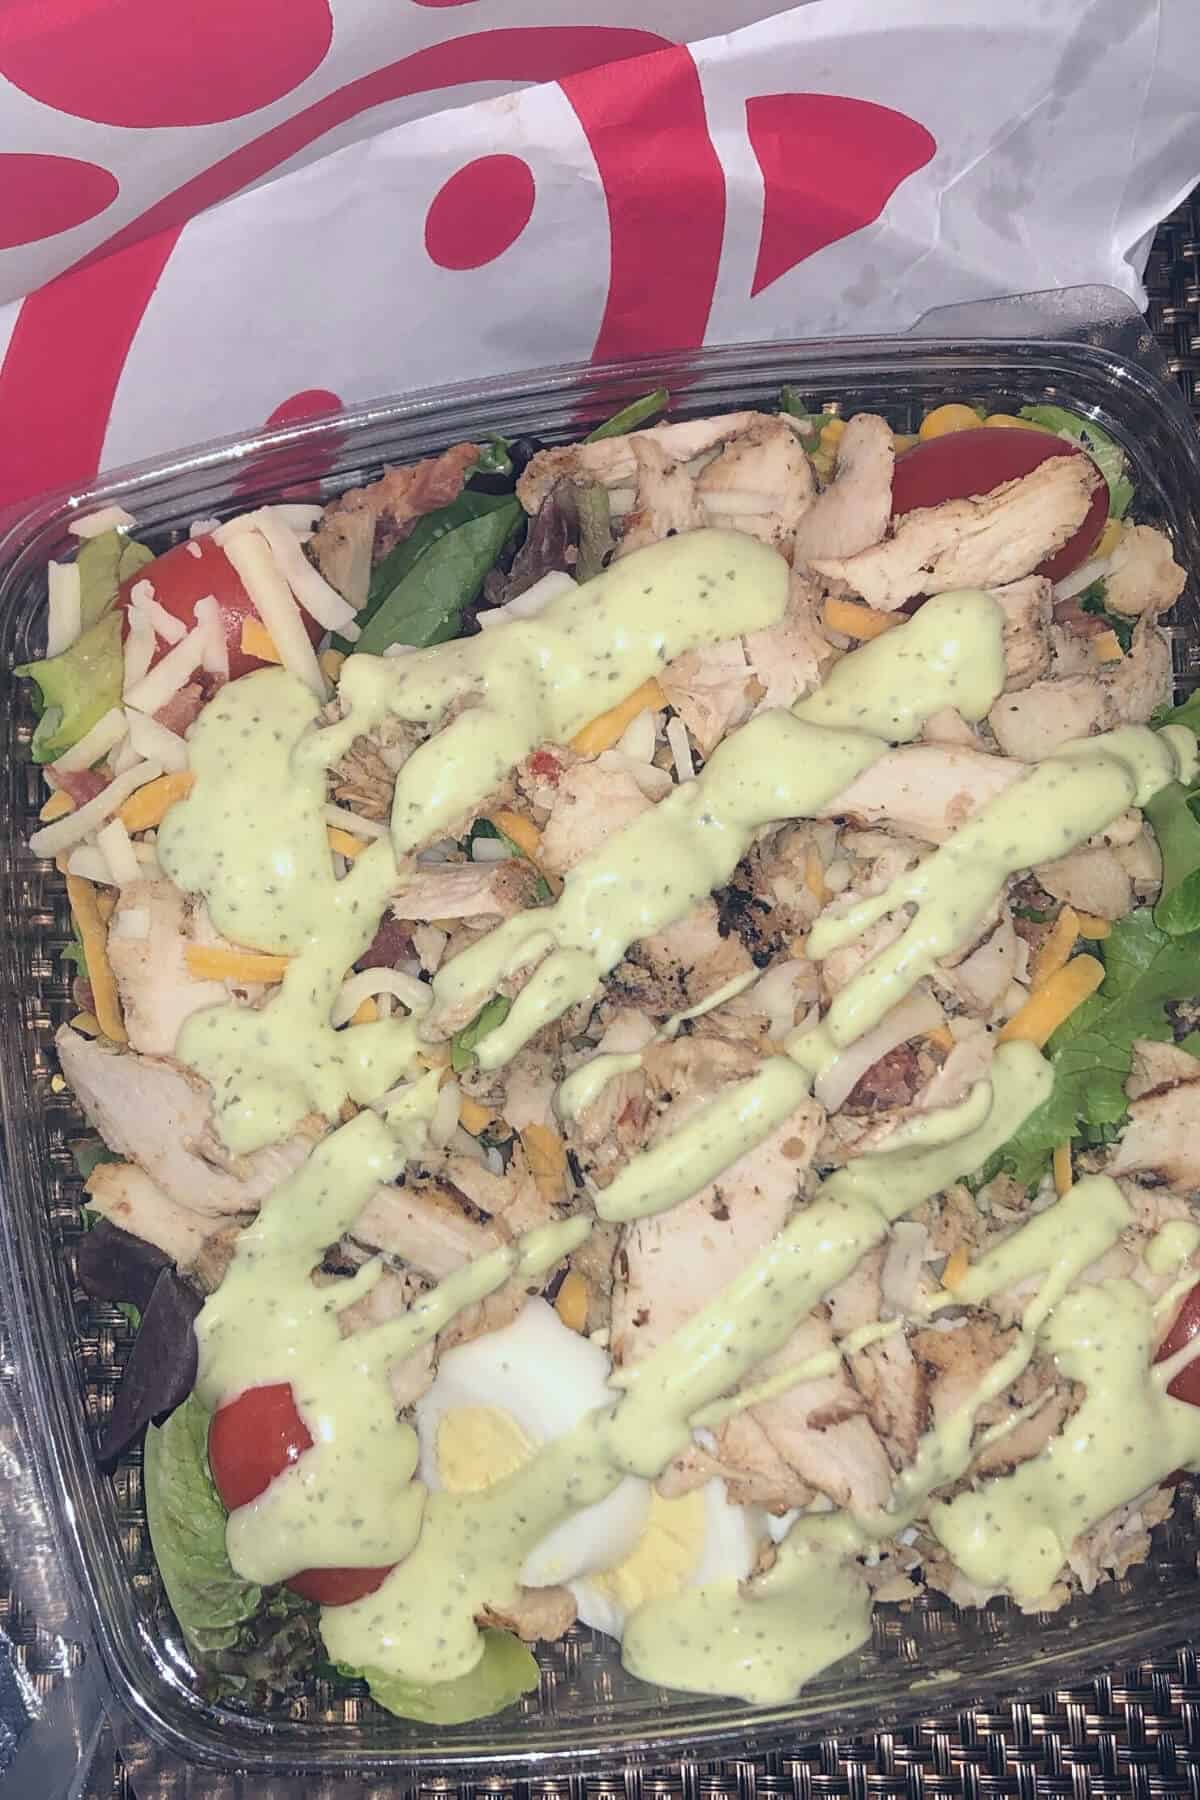 chick-fil-a salad with dressing